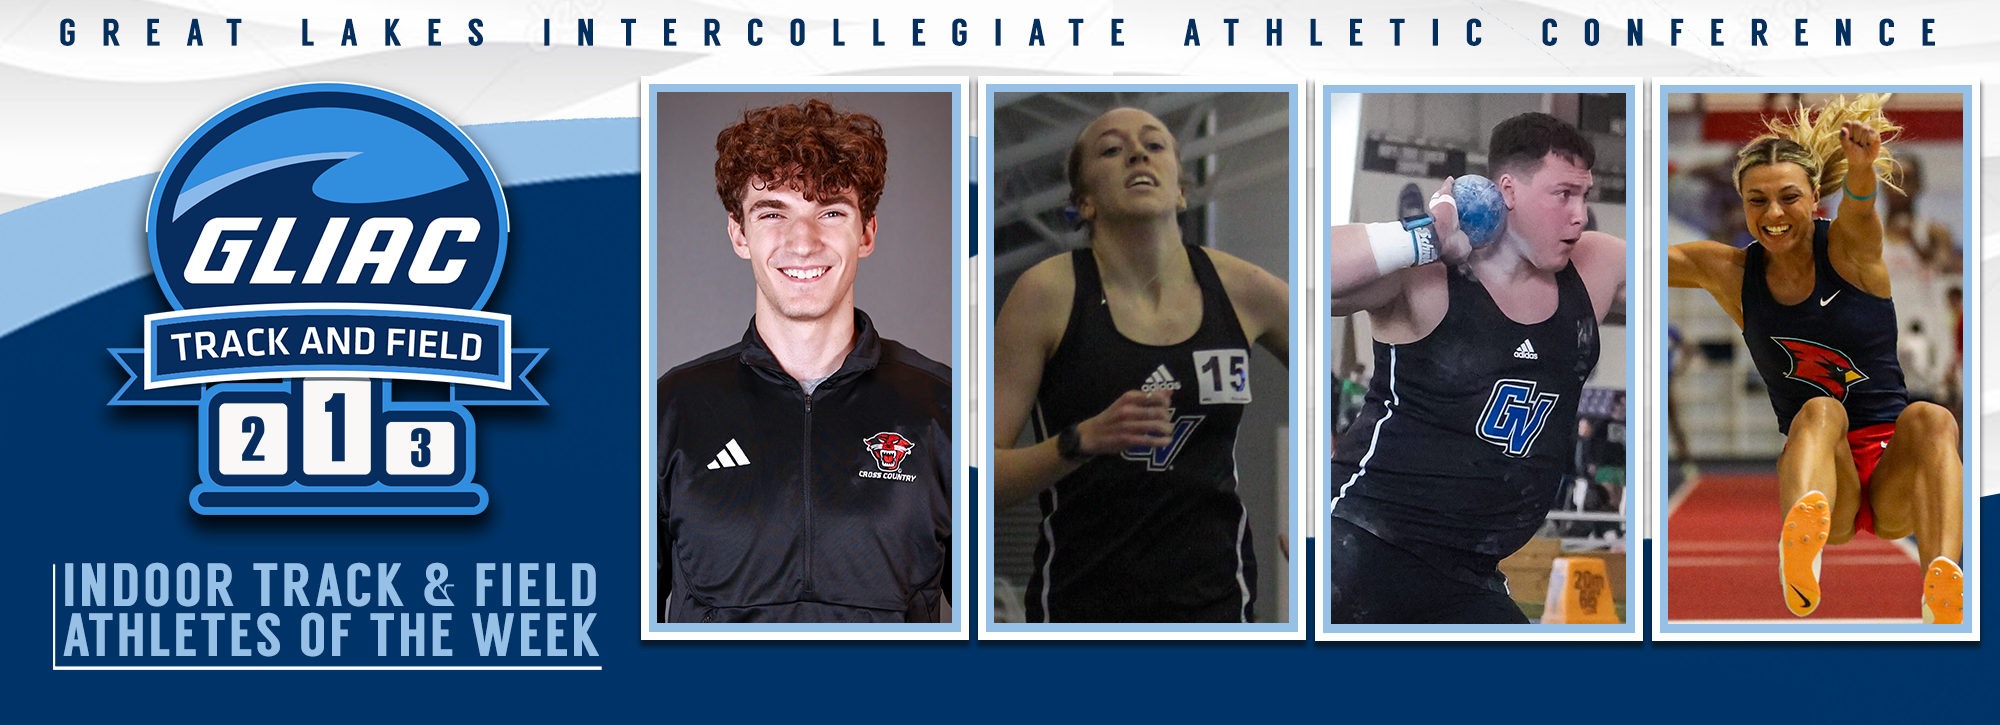 GLIAC announces indoor track & field athletes of the week